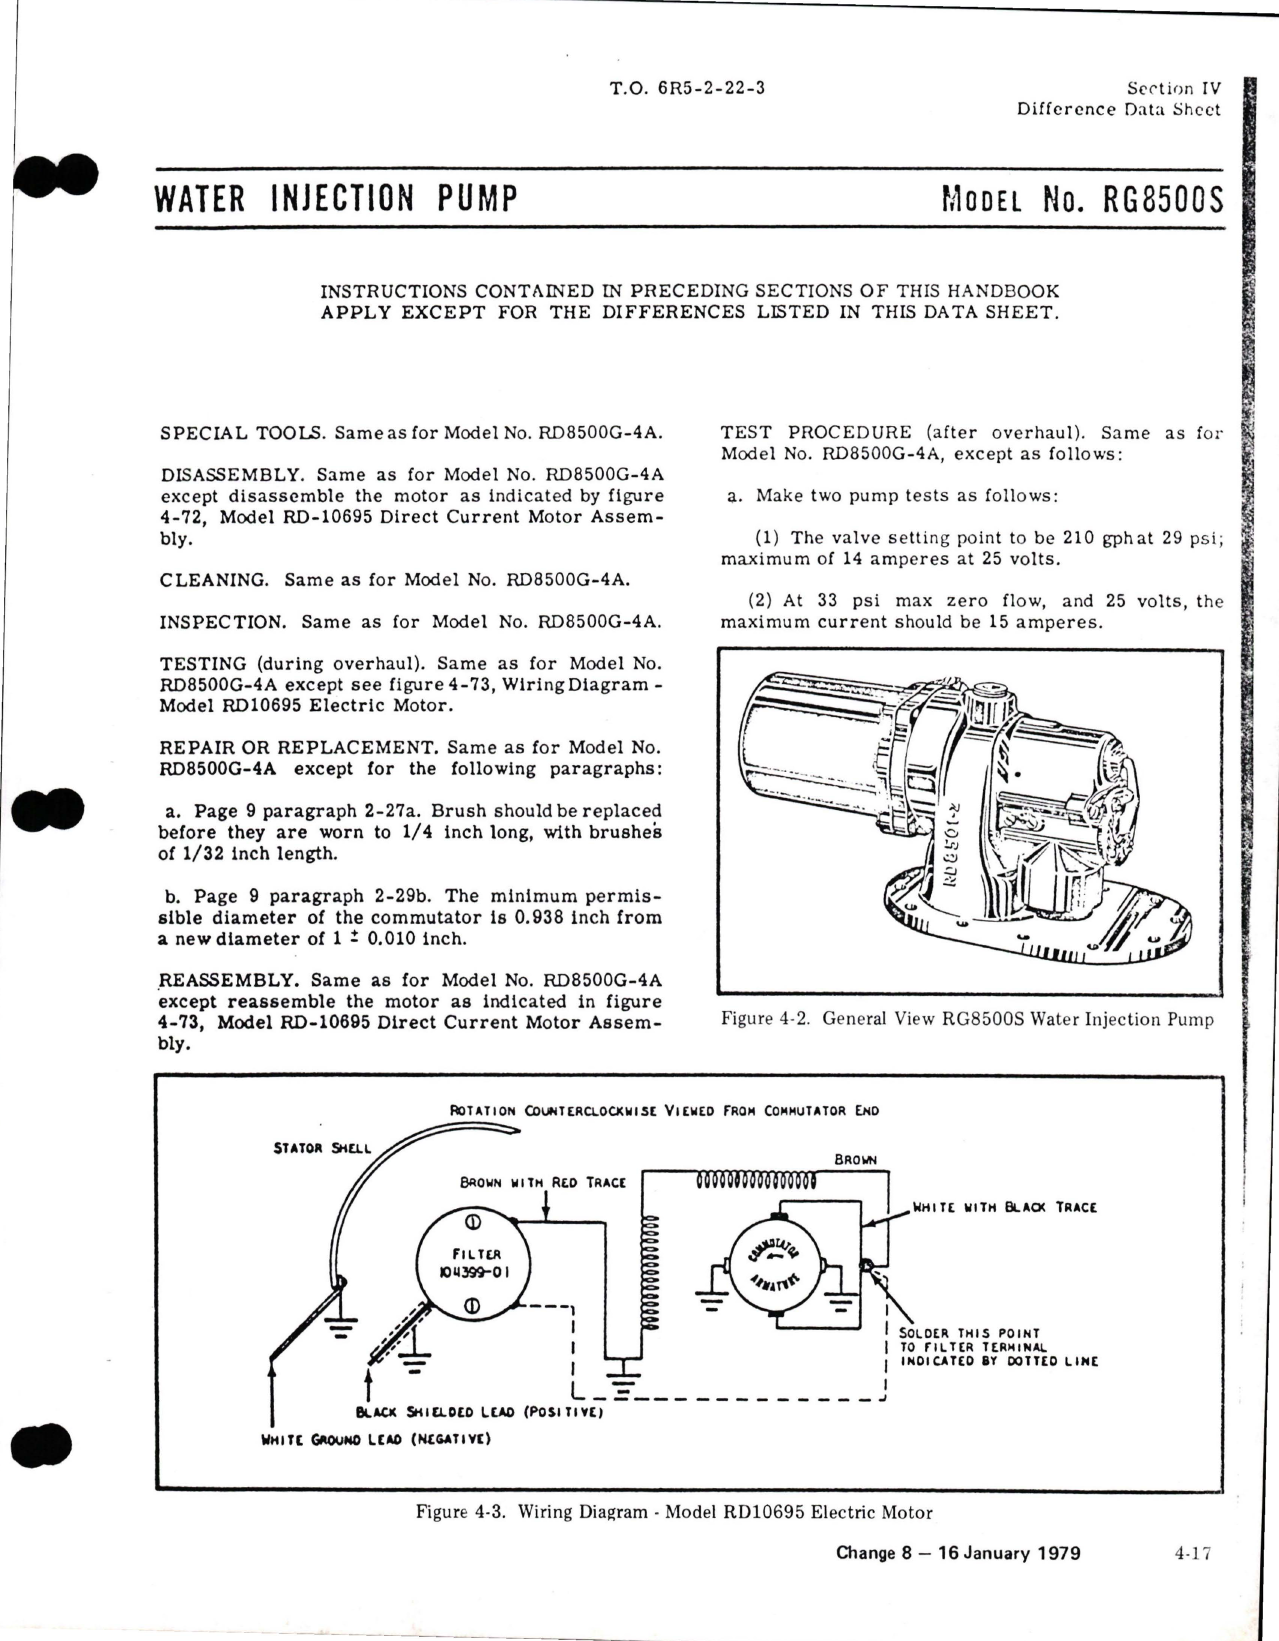 Sample page 9 from AirCorps Library document: Overhaul for Water Injection Pump - Model RD8500 Series